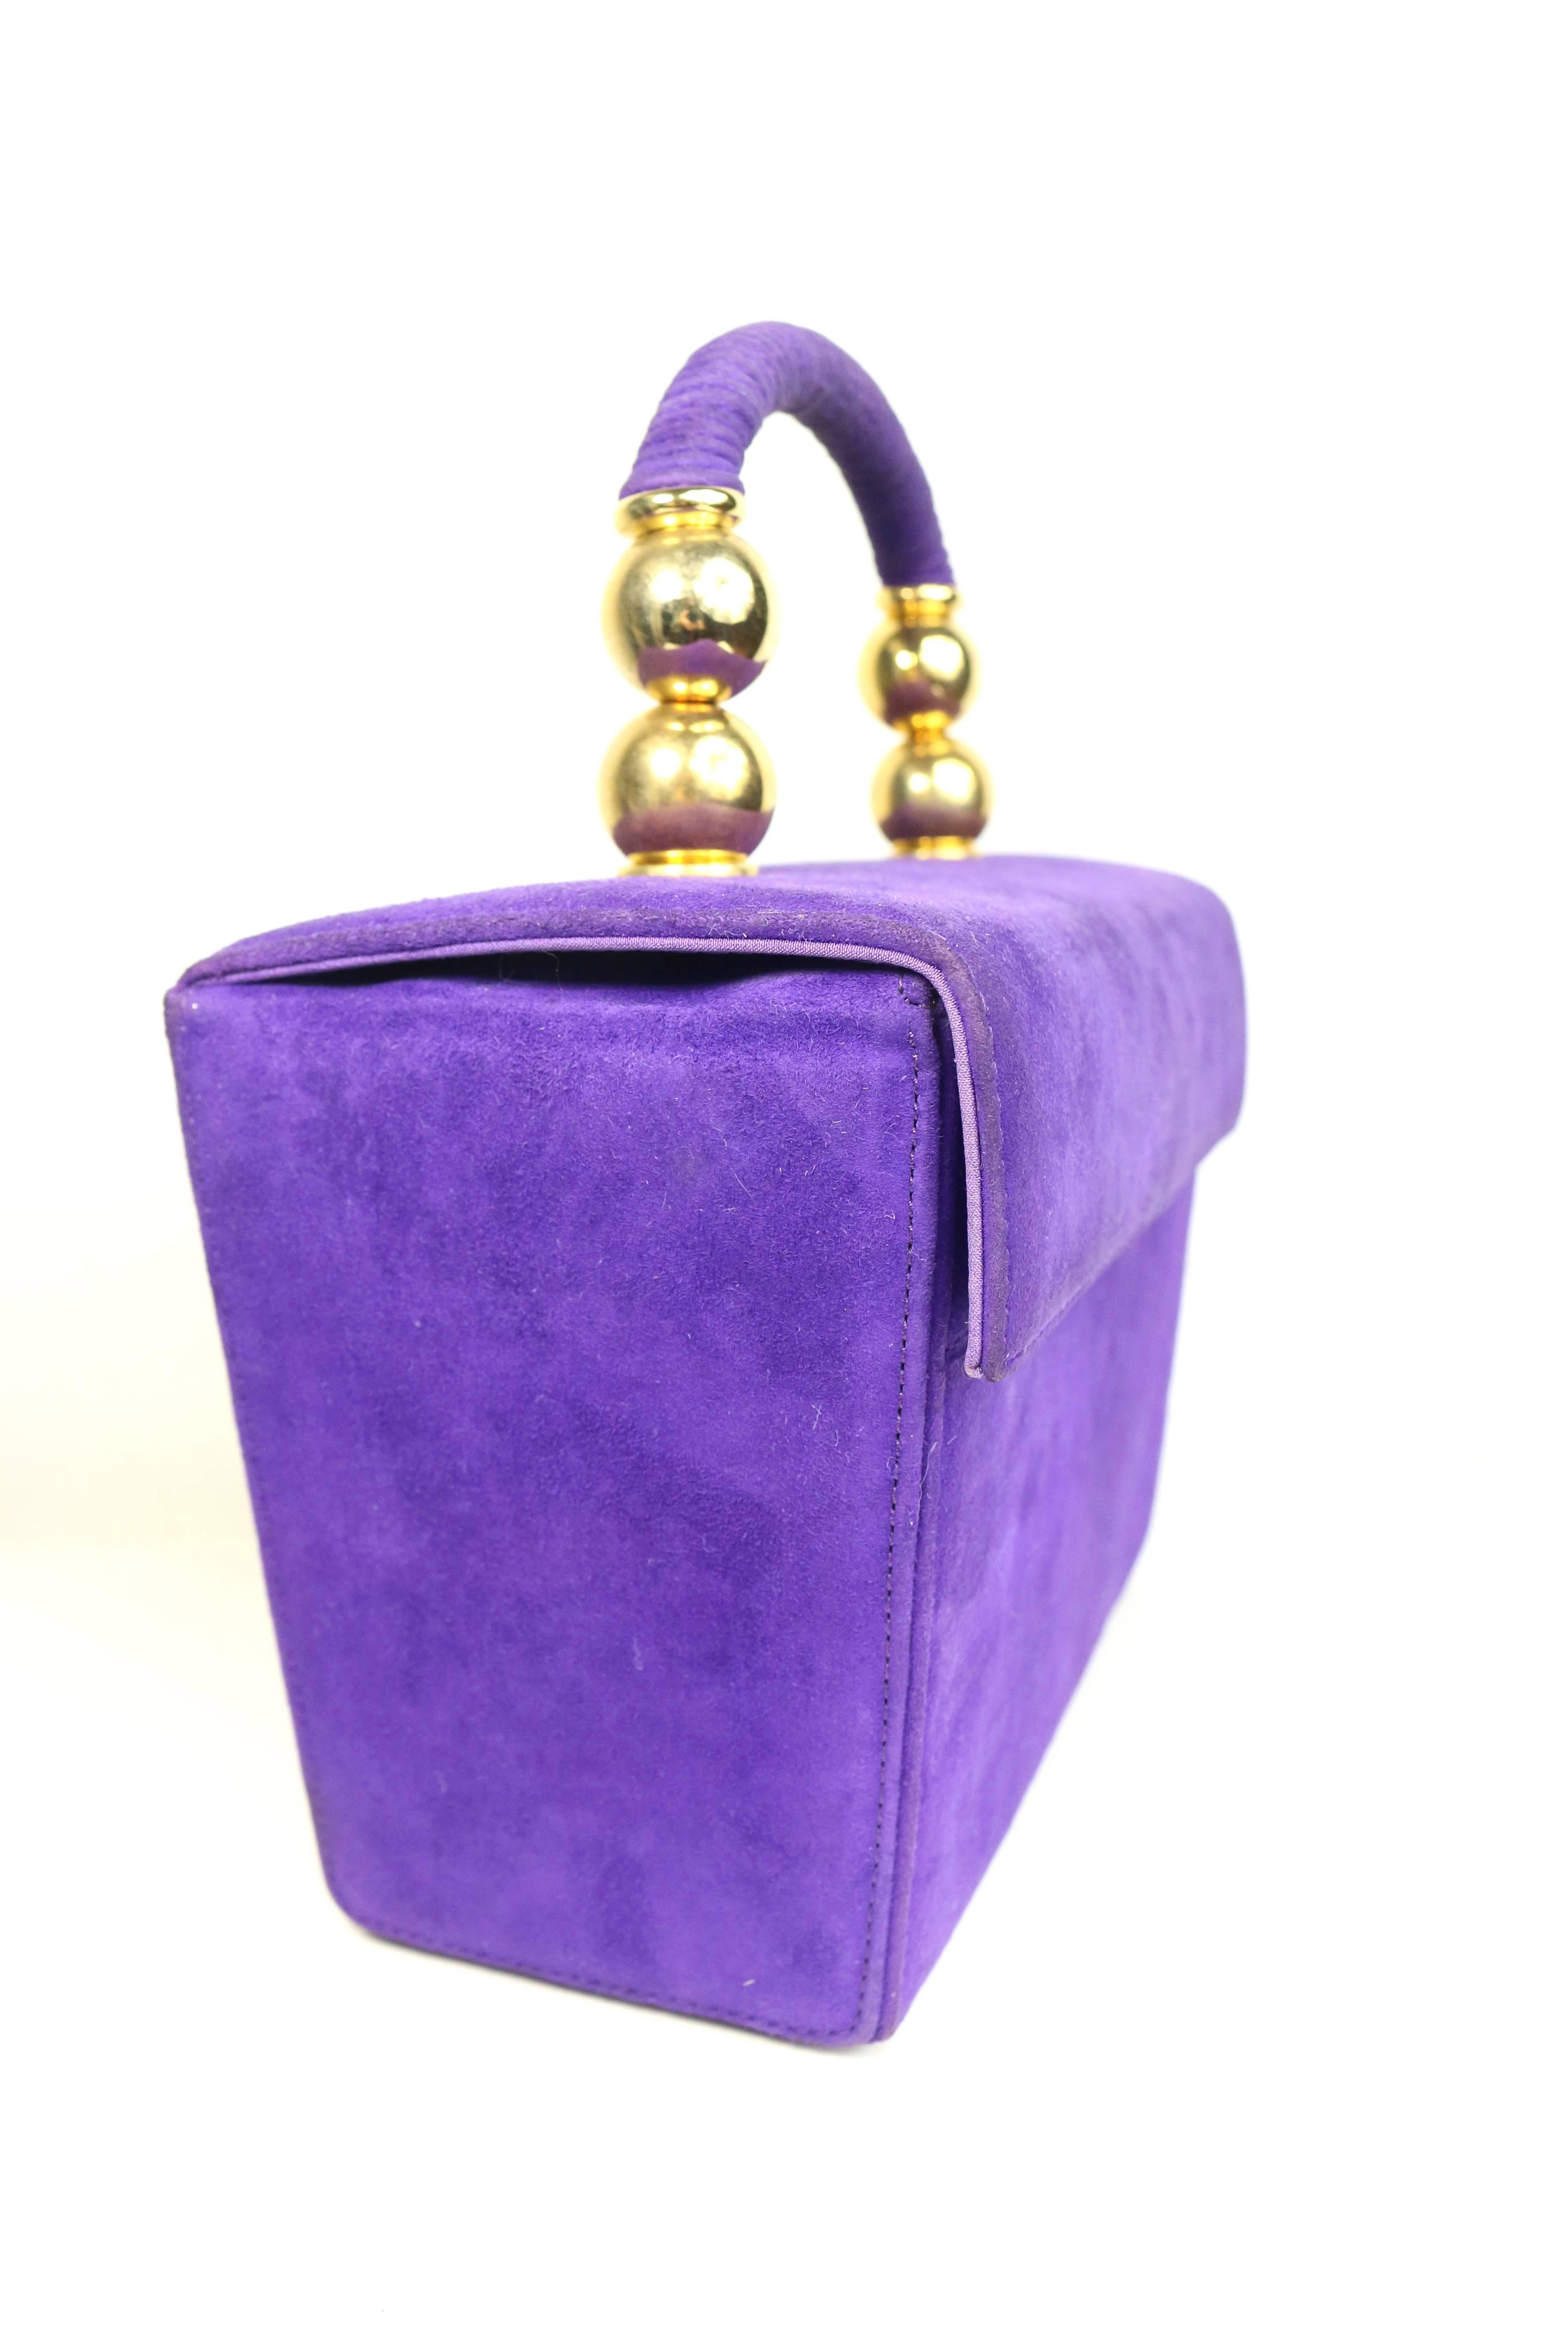 - Vintage 80s Baldinini purple suede box handbag. This bag was exclusive for Romano. 

- Featuring two rounds gold toned hardware with purple suede handle 

- Small flap with snap button closure. 

- Four gold toned studs at the bottom. 

- Interior